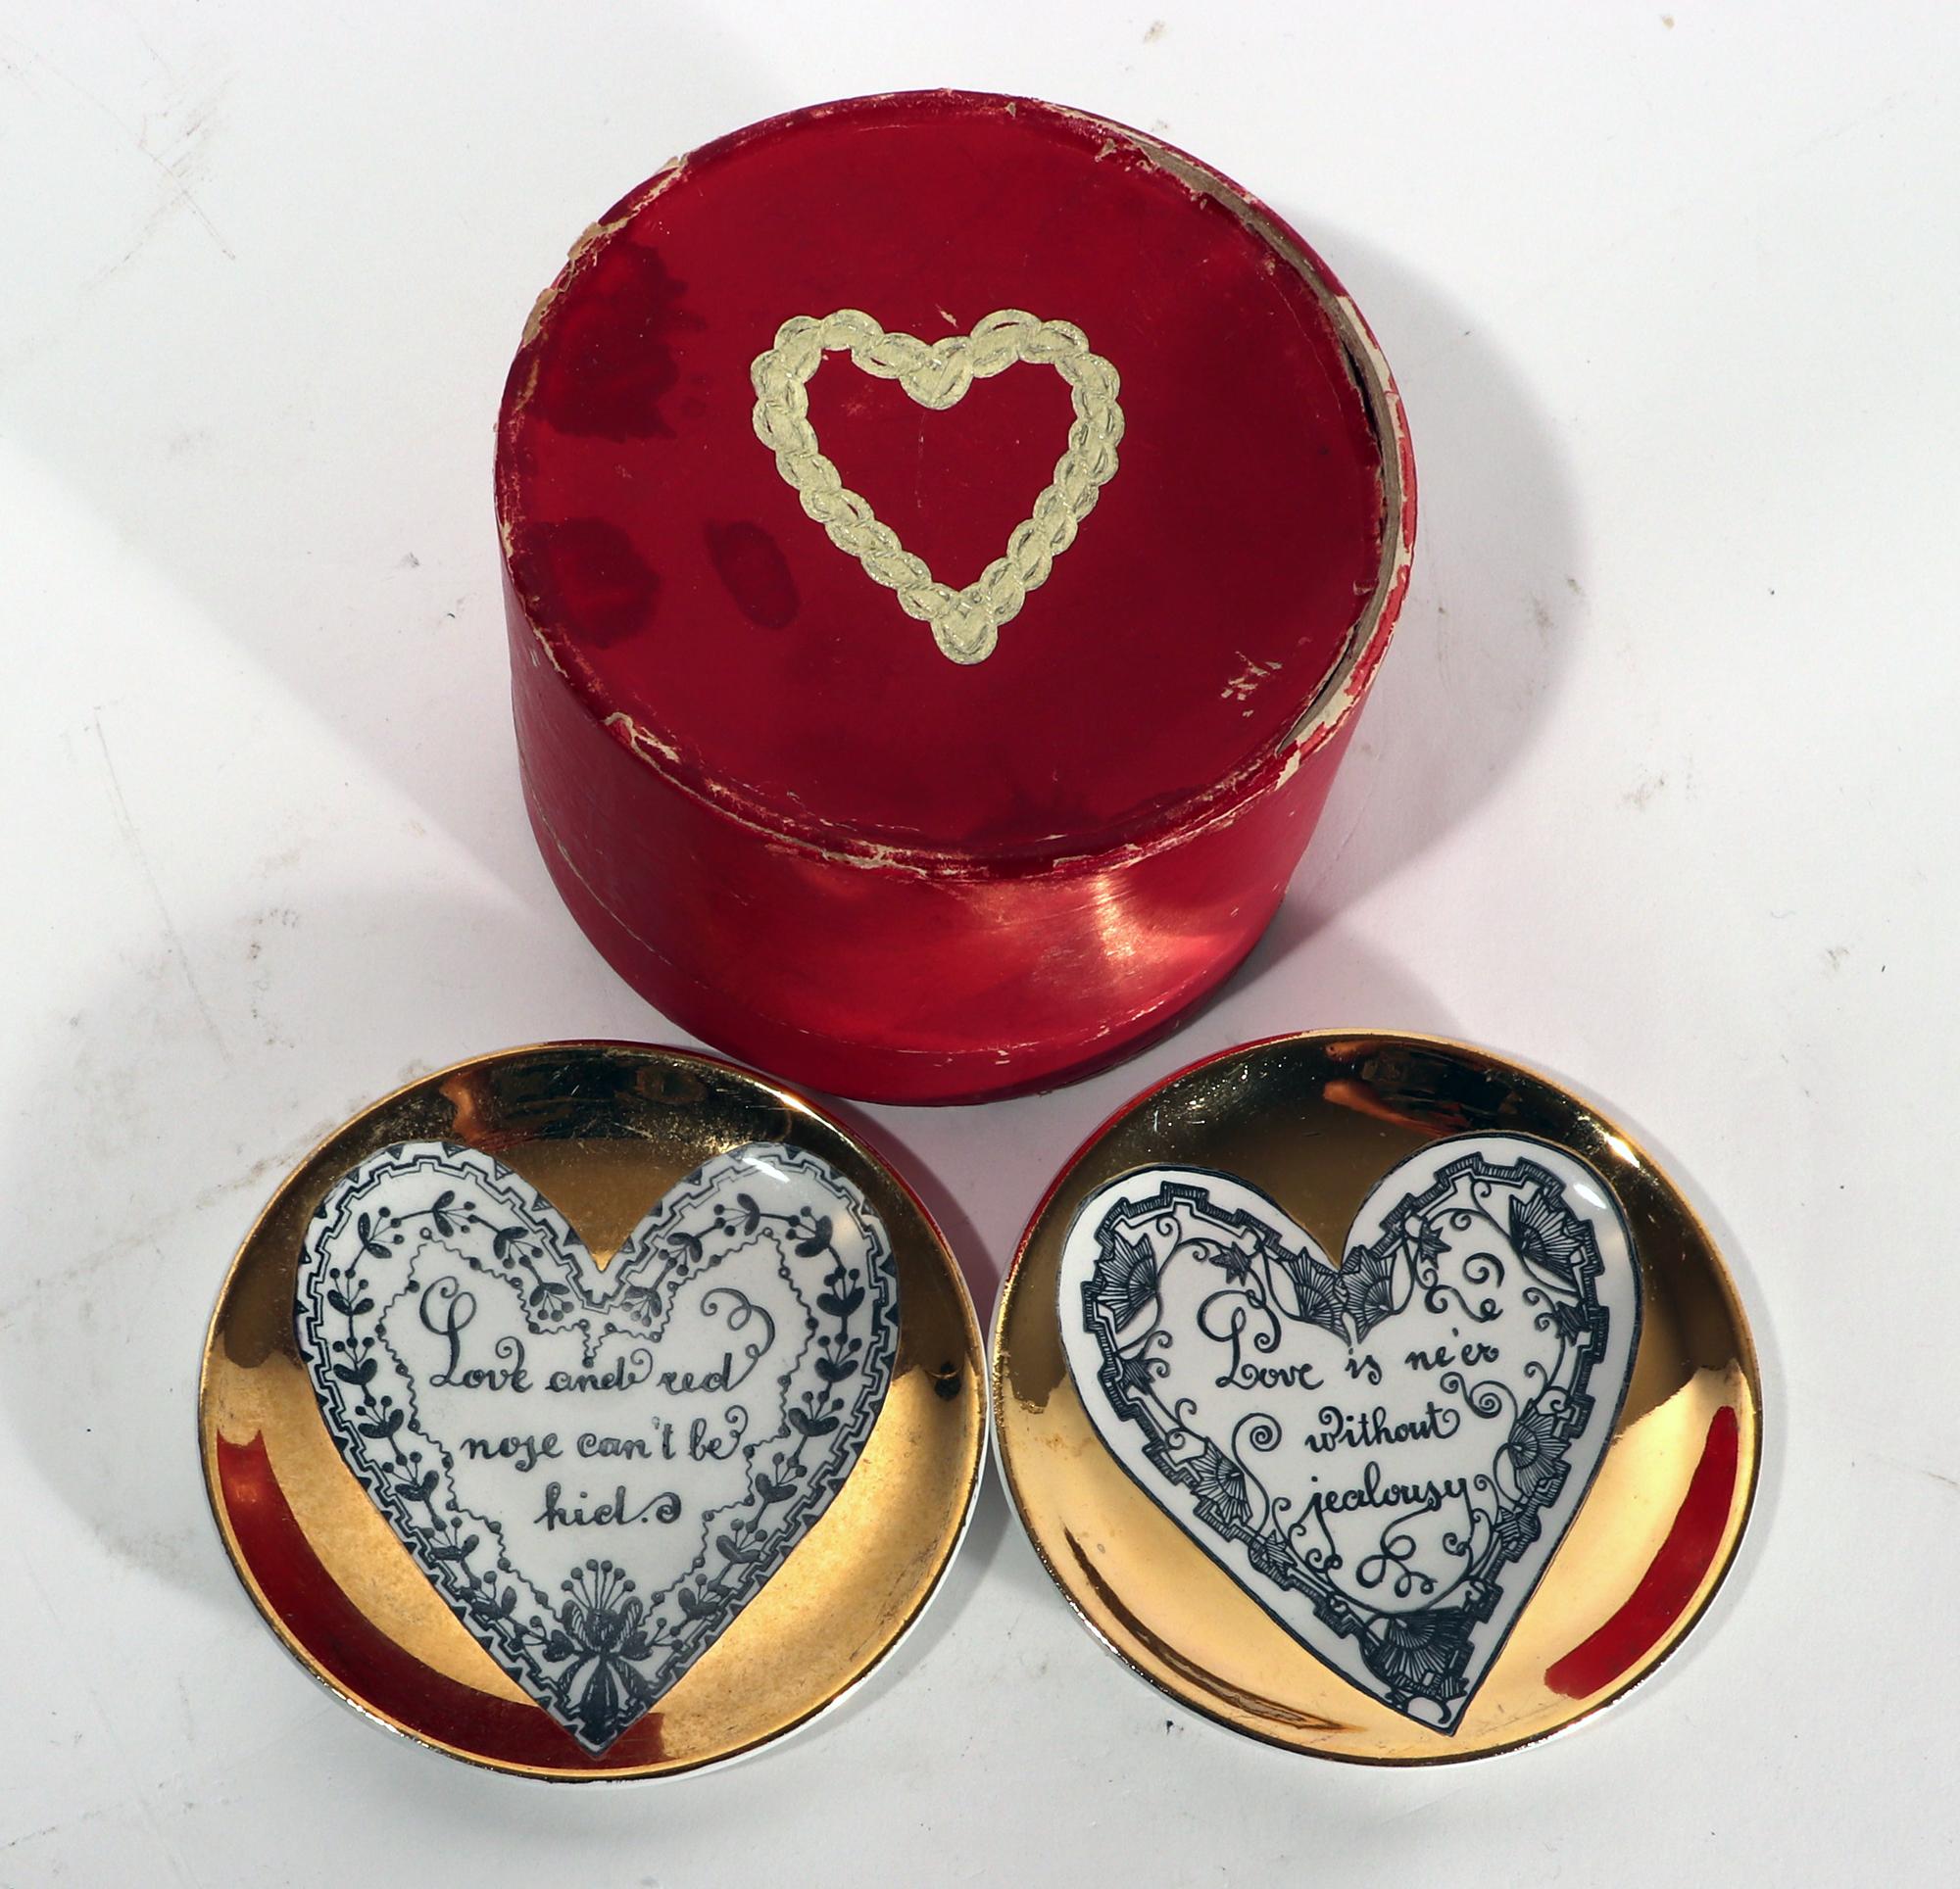 Piero Fornasetti love coasters & original red box,
1950's

Each coaster has a central white heart on a gold ground. Within each heart is a saying about love framed by a different heart-shaped border. They rest in their original early red